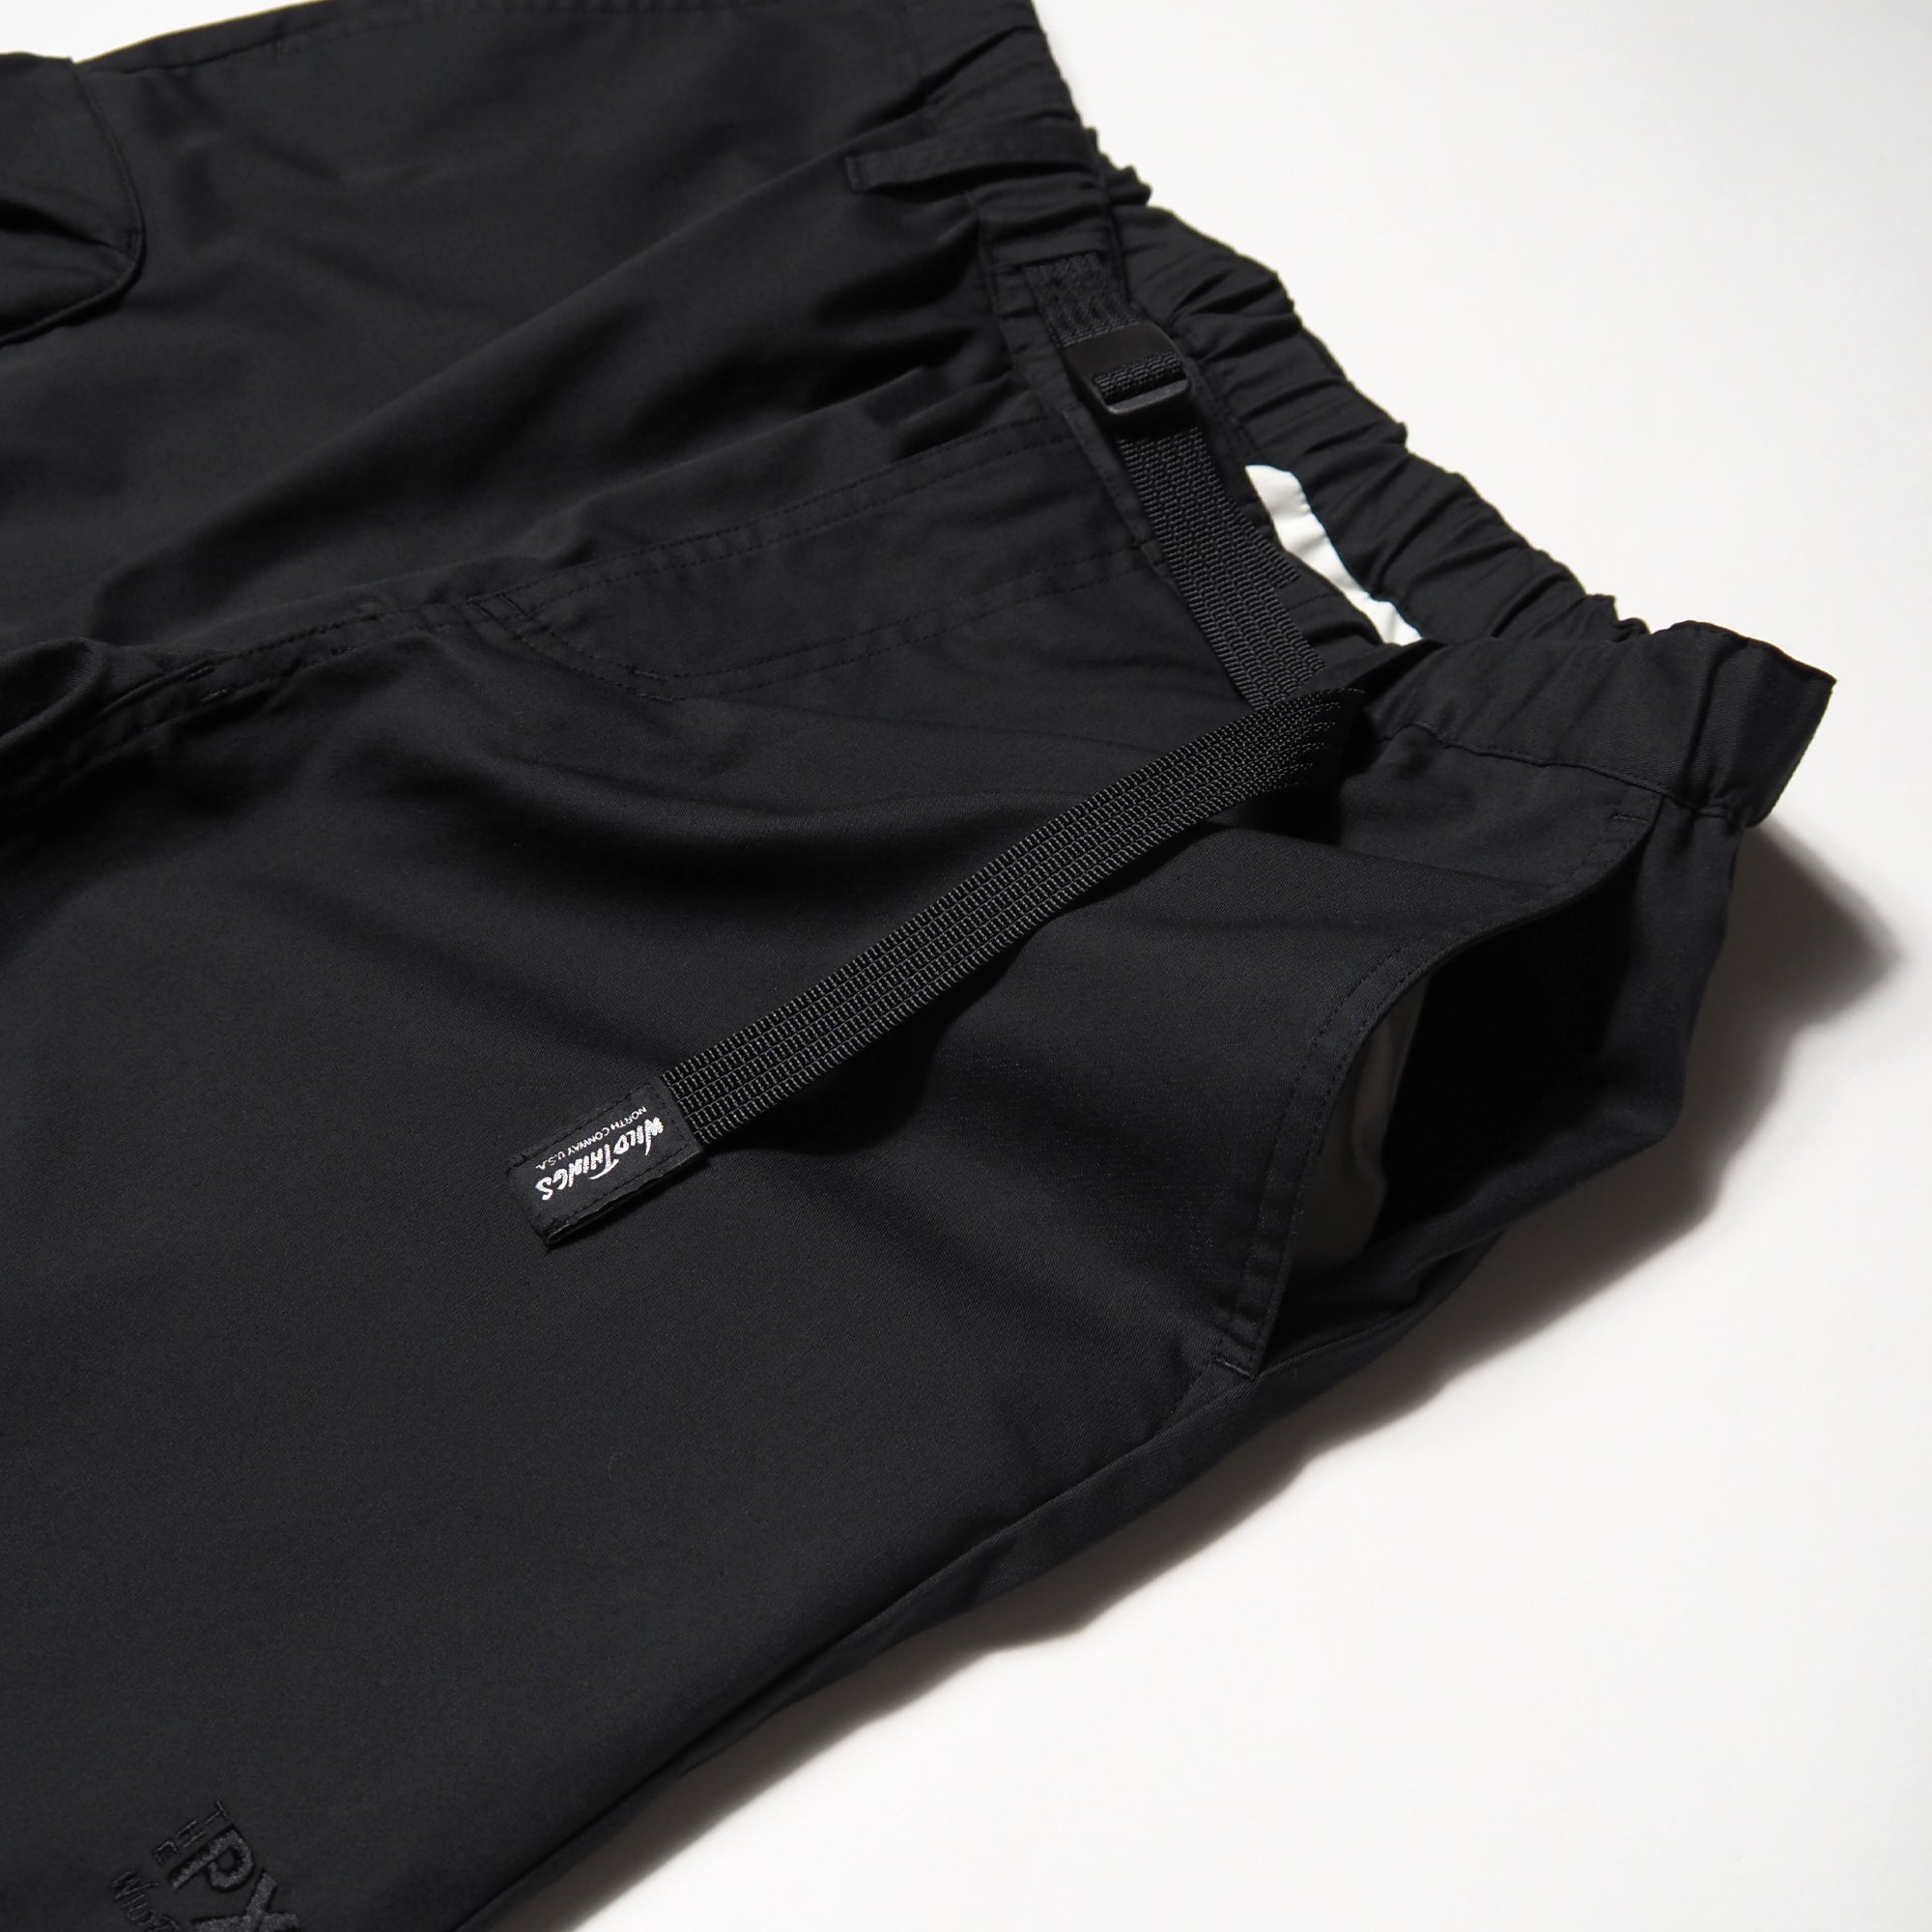 THE PX WILDTHINGS forGOLF / BELTED JOGGER PANTS [WPX230104]【島根